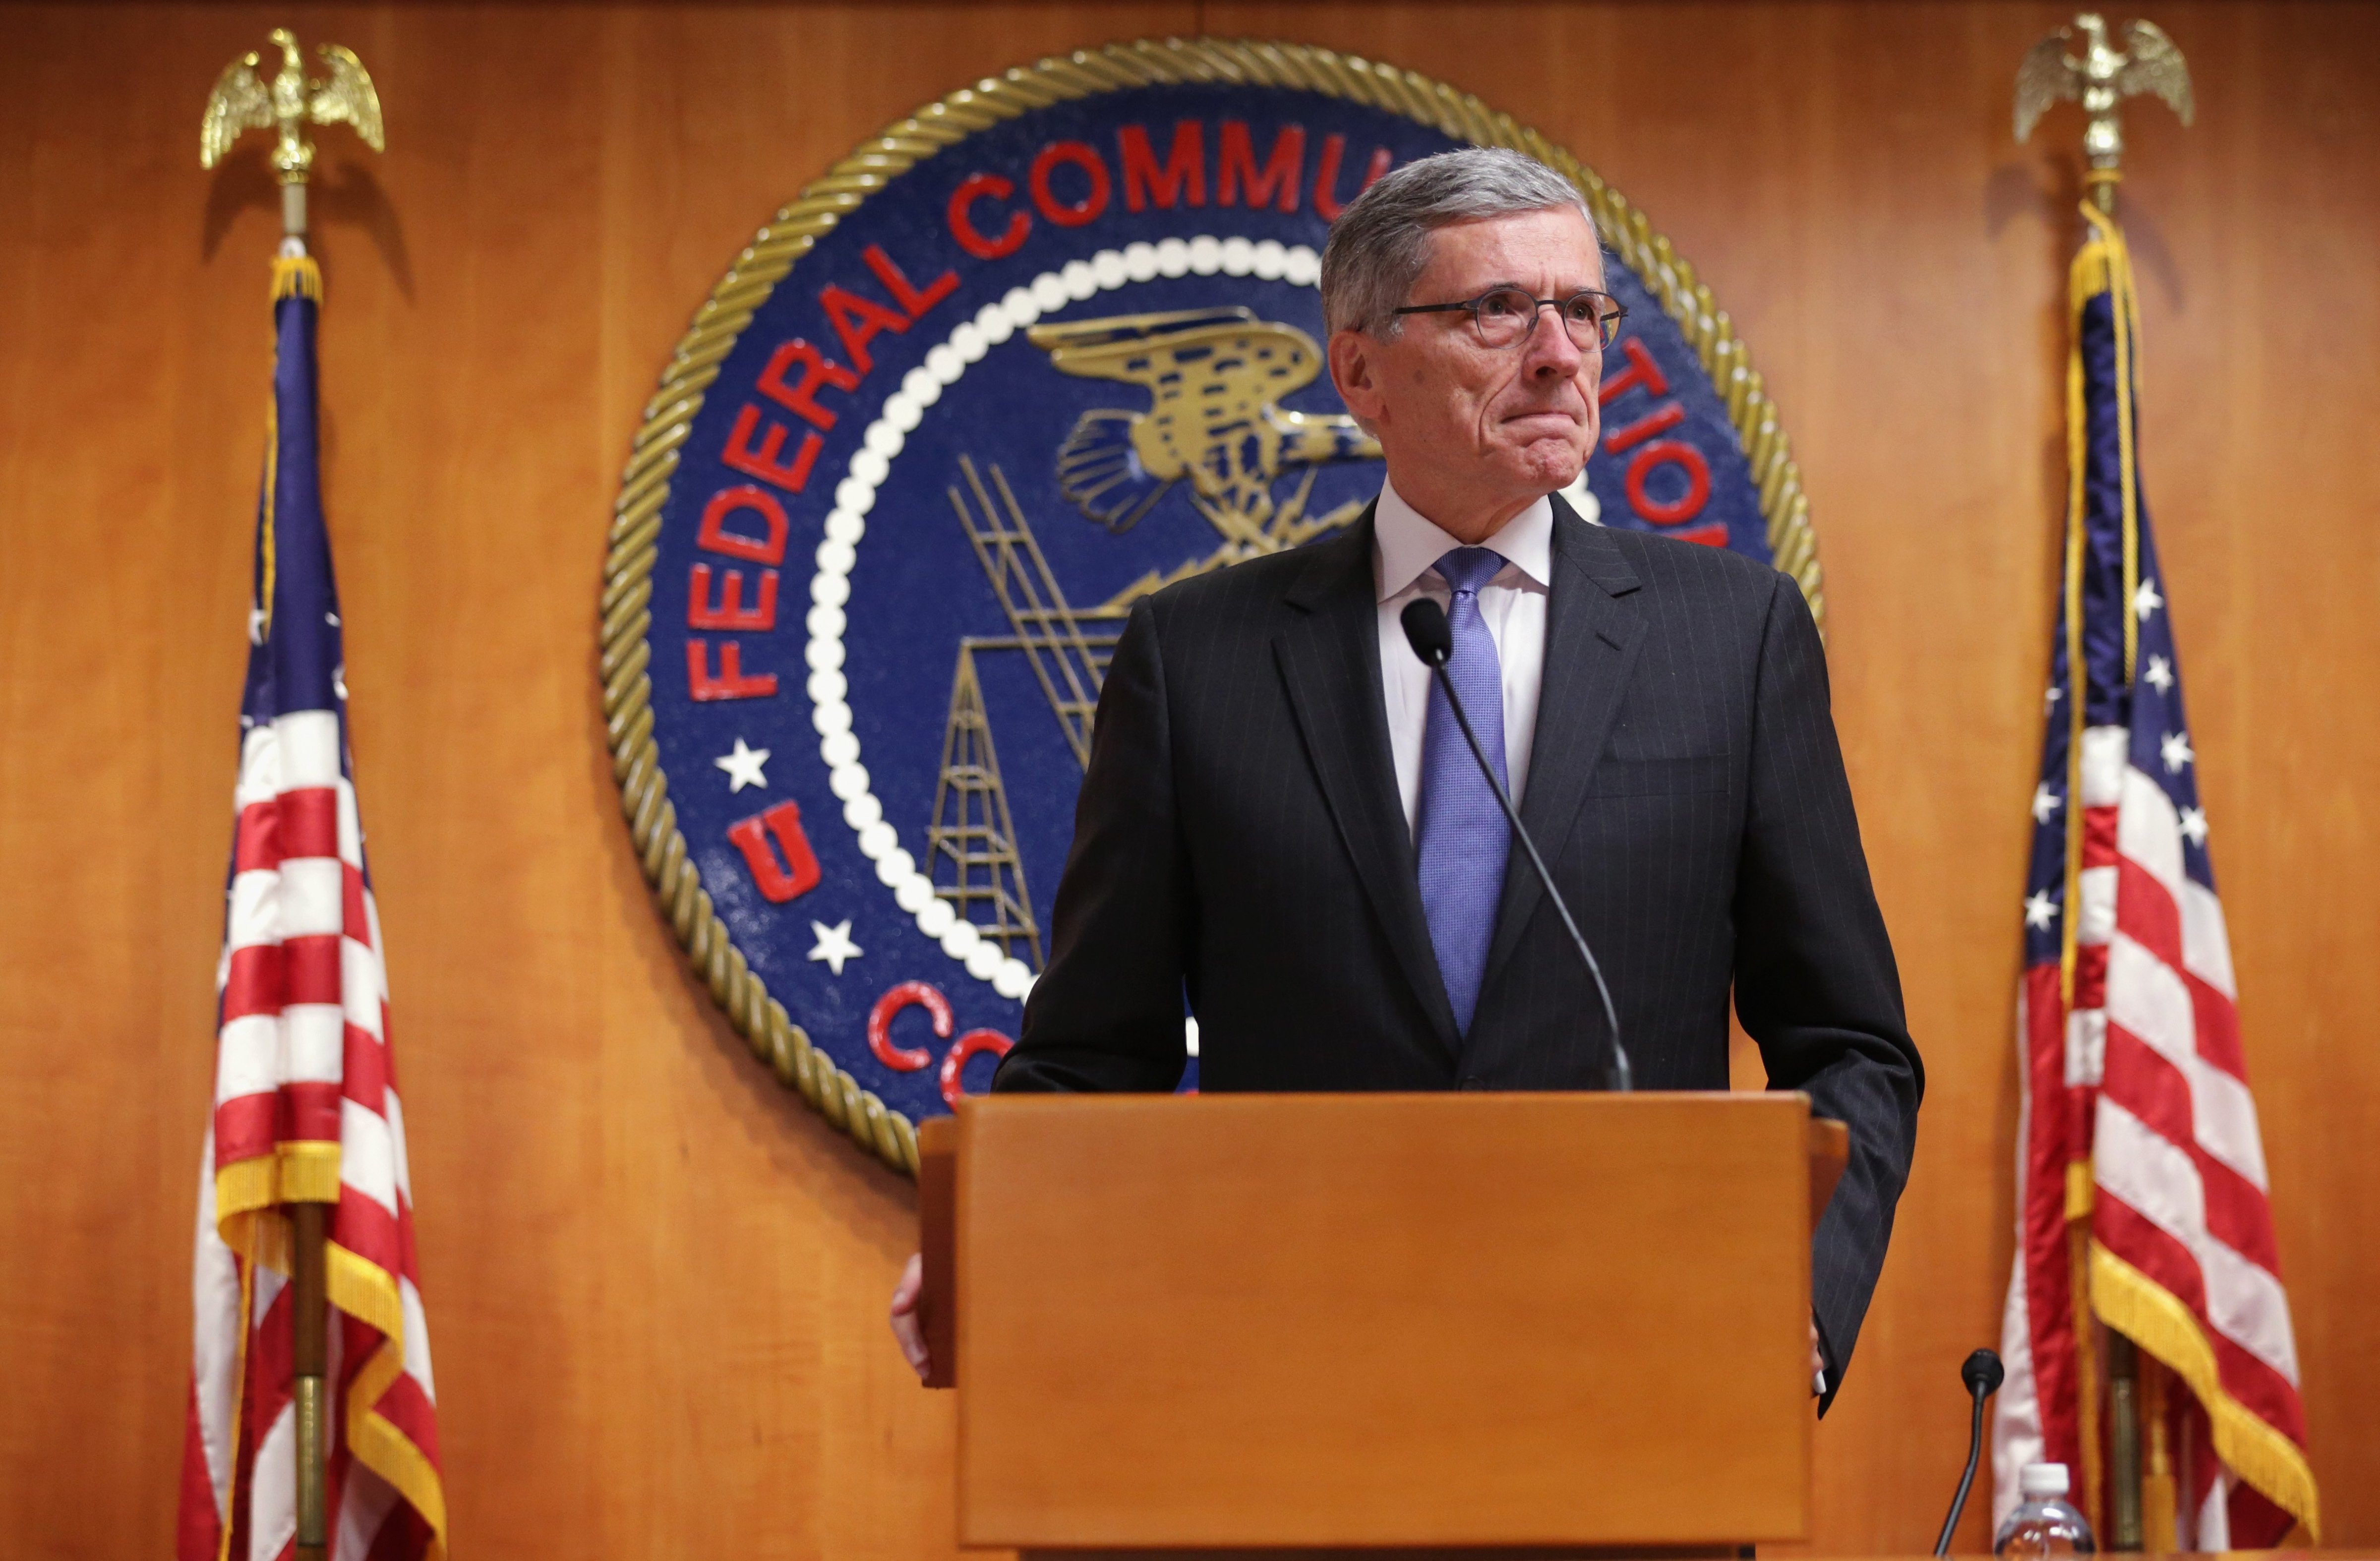 Federal Communications Commission (FCC) Chairman Tom Wheeler listens during a news conference after an open meeting to receive public comment on proposed open Internet notice of proposed rule-making and spectrum auctions on May 15, 2014 at the FCC headquarters in Washington. (Alex Wong—Getty Images)